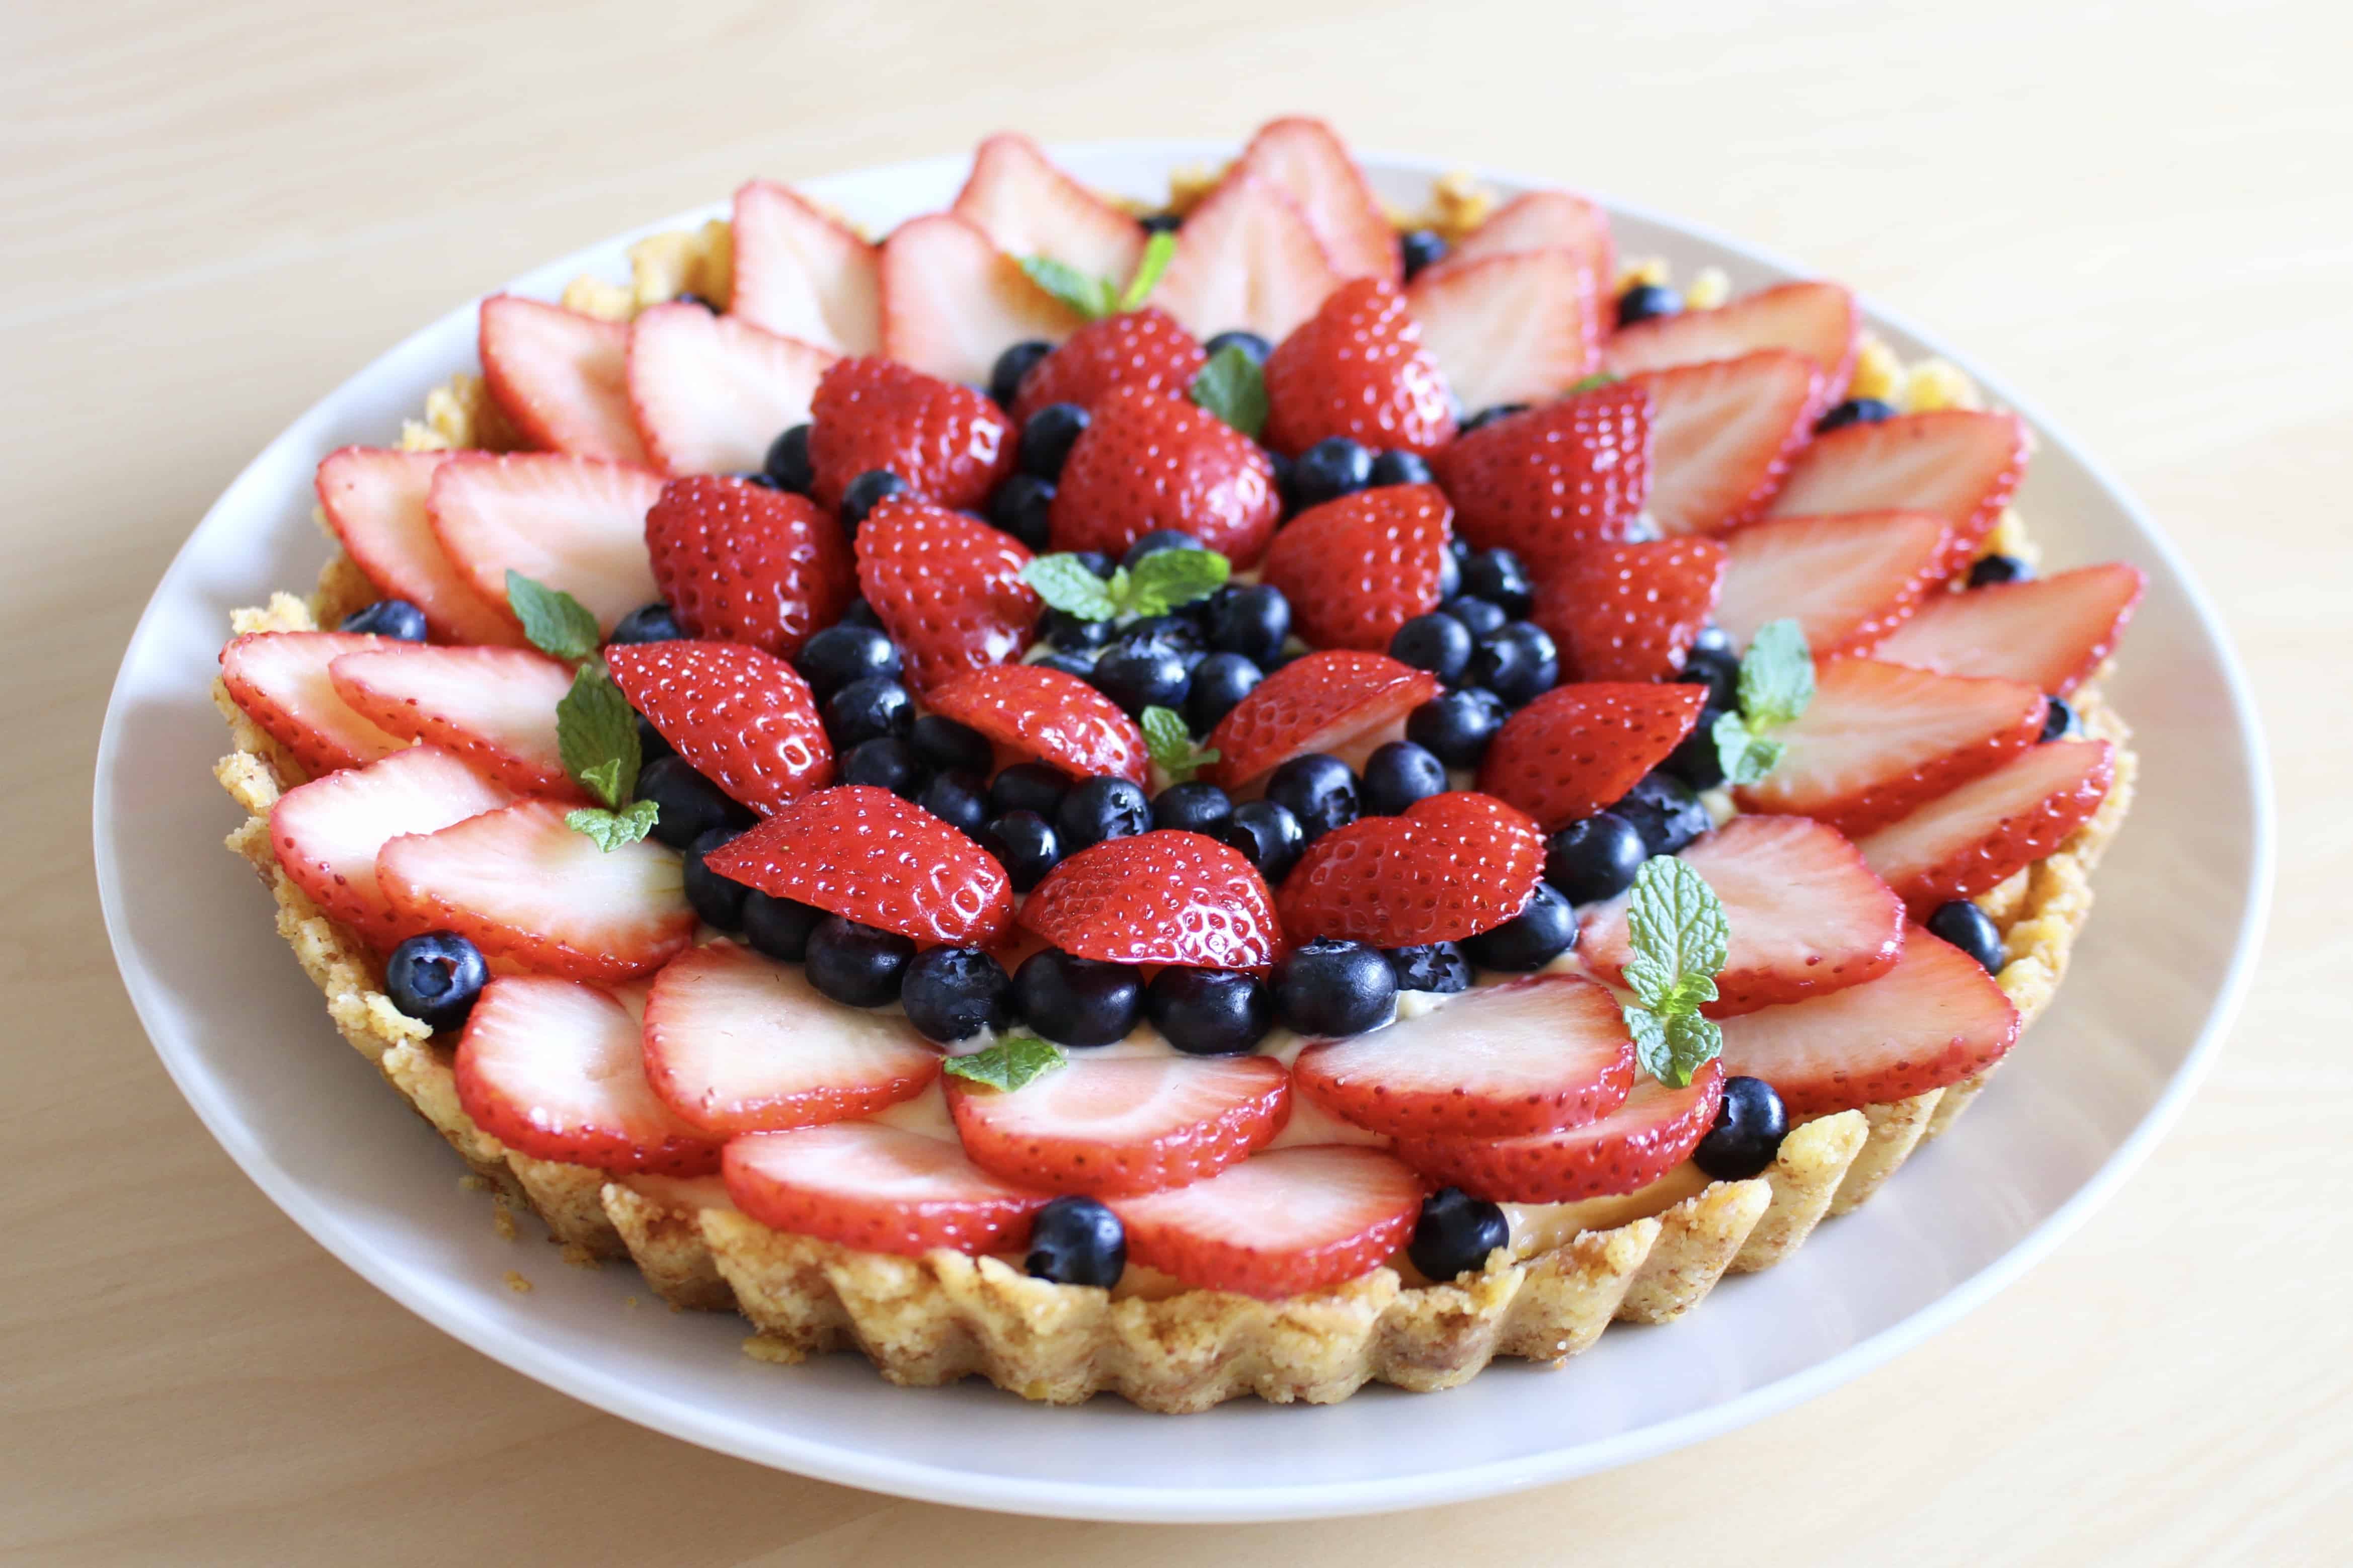 Strawberry and blueberry tart